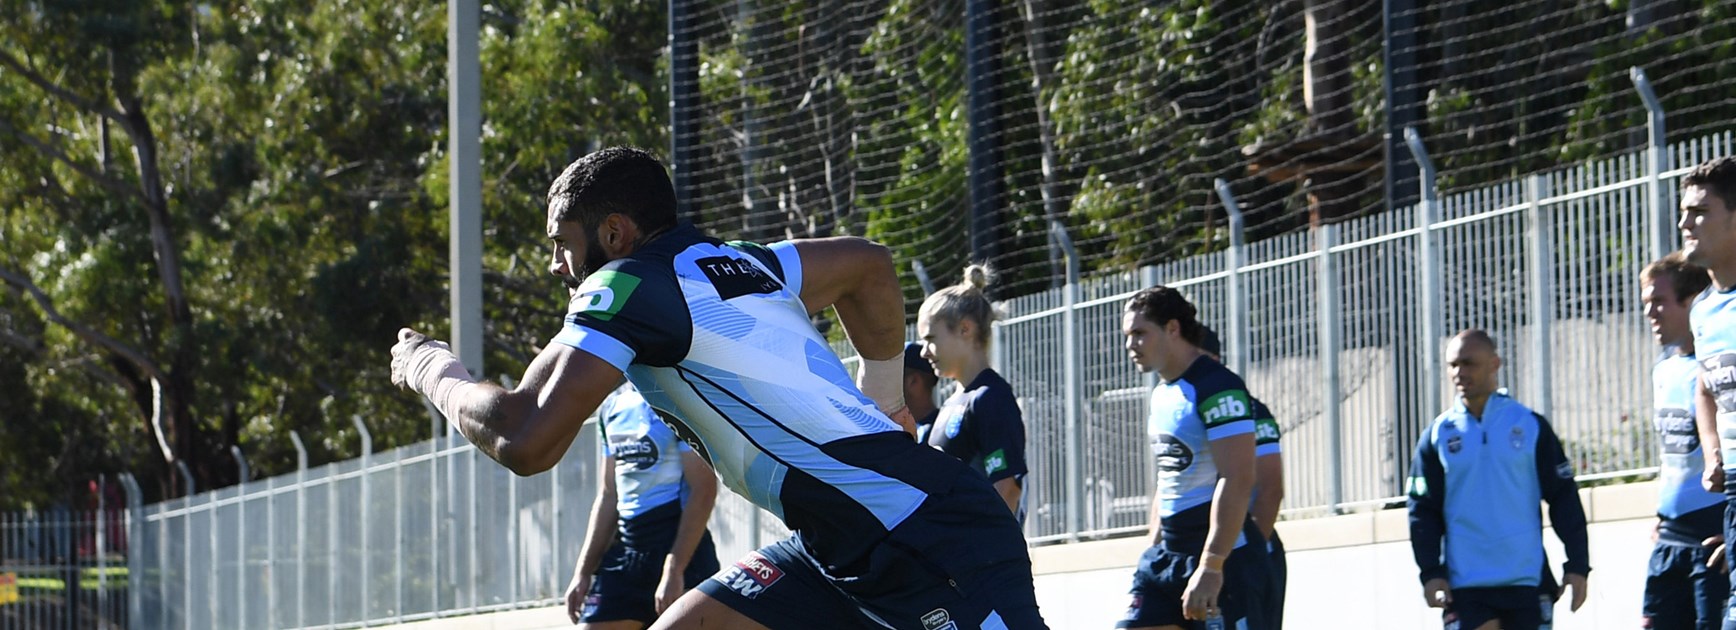 Josh Addo-Carr takes off at Brydens Lawyers NSW Blues training.